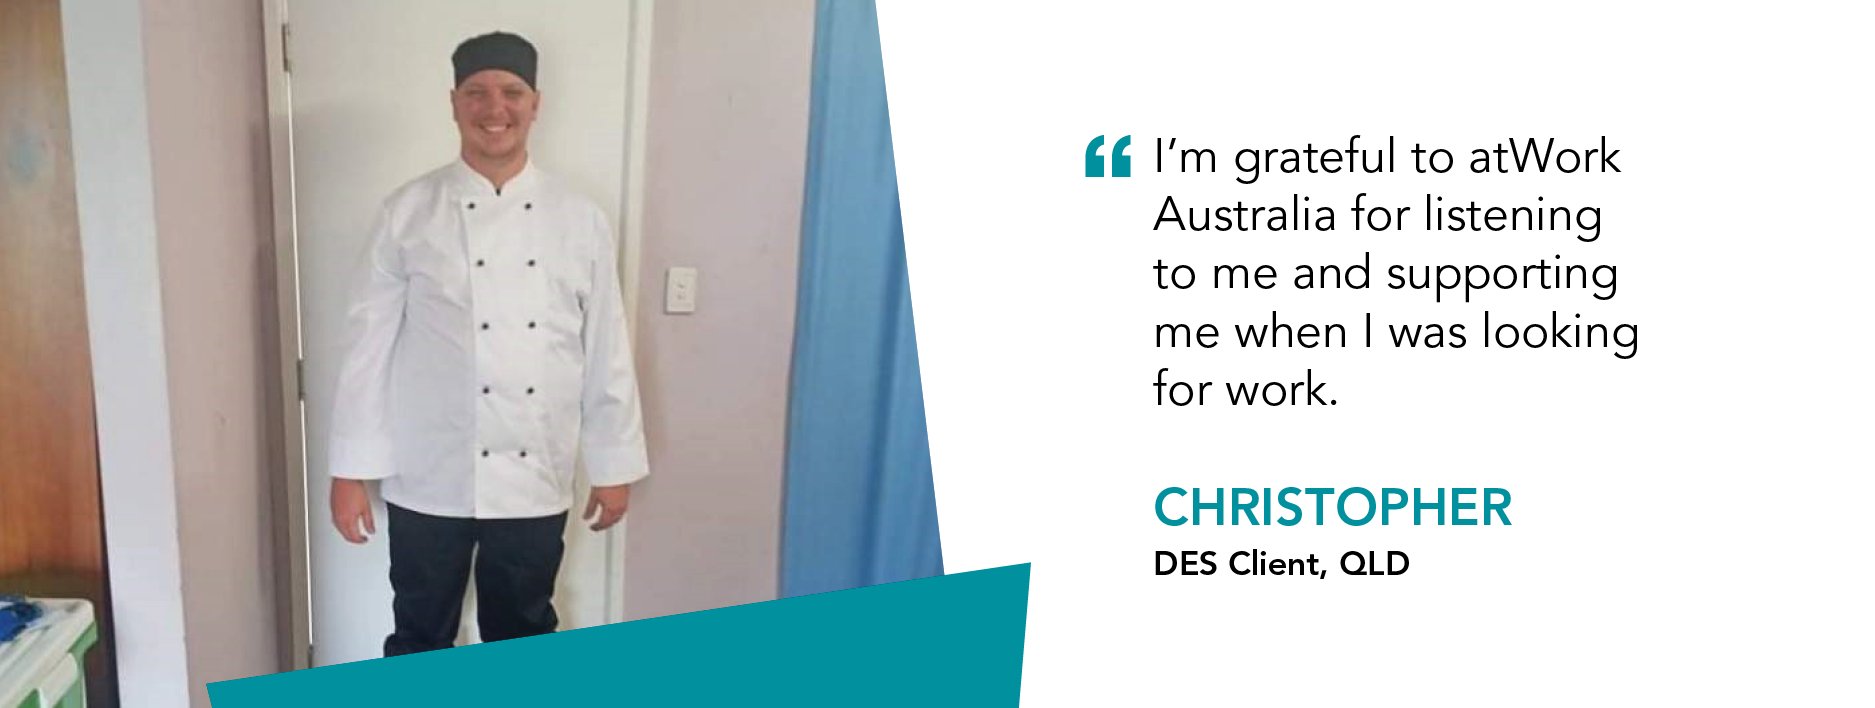 "I'm grateful to atWork Australia for listening to me and supporting me when I was looking for work," said Christopher, Disability Employment Services Client